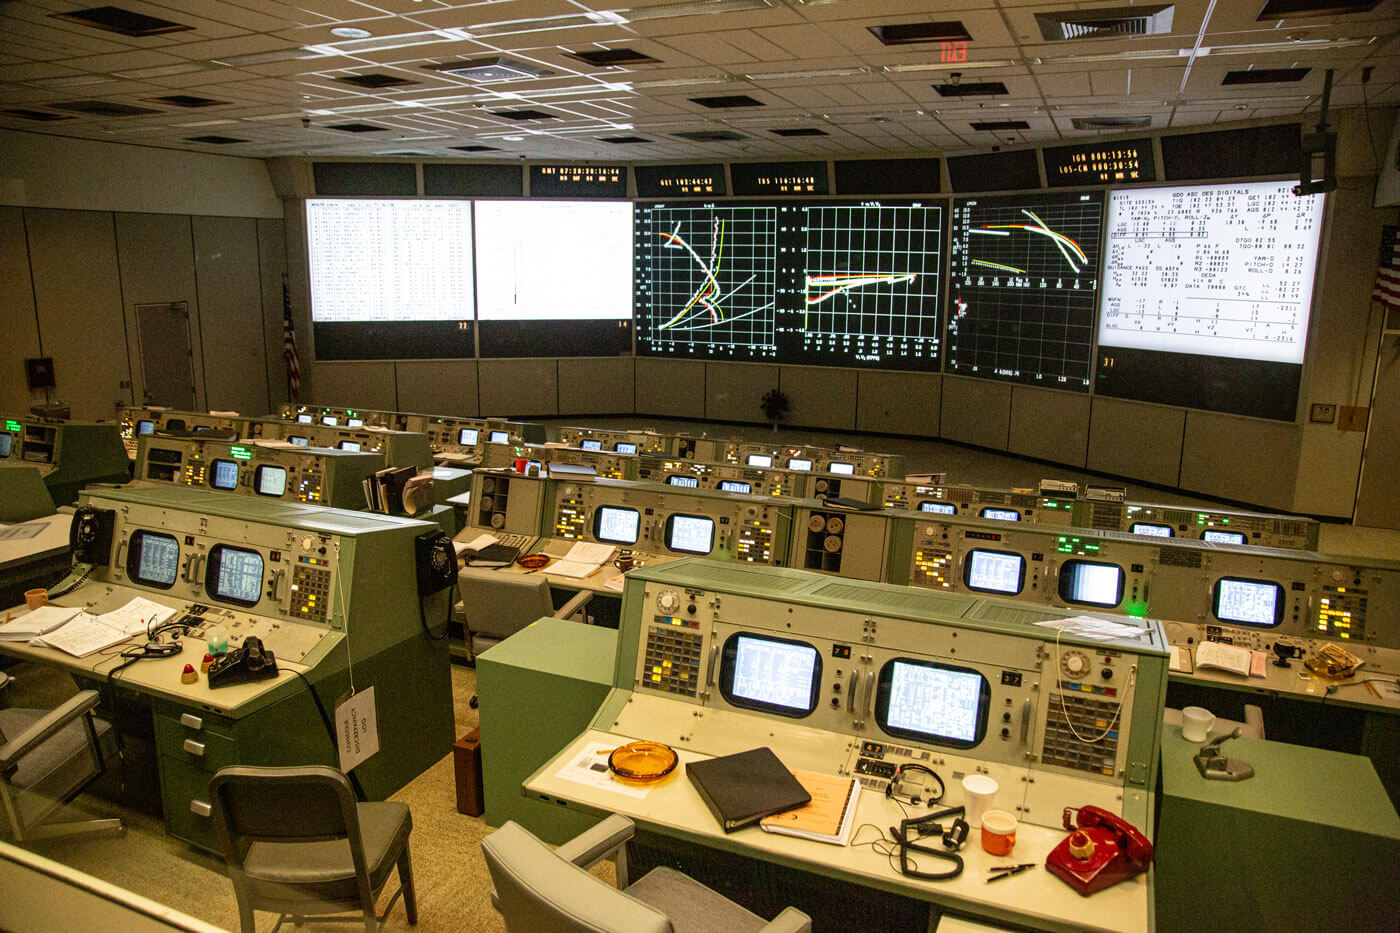 See the restored Apollo Mission Control Center with the actual flight control consoles brought back to life. The five large screens across the front of the room have been reactivated with projections to recreate the exact images seen during the Apollo 11 mission. See the console buttons illuminated and furnishings on the consoles including flight control manuals, ashtrays, pens, maps, coffee cups and headsets.